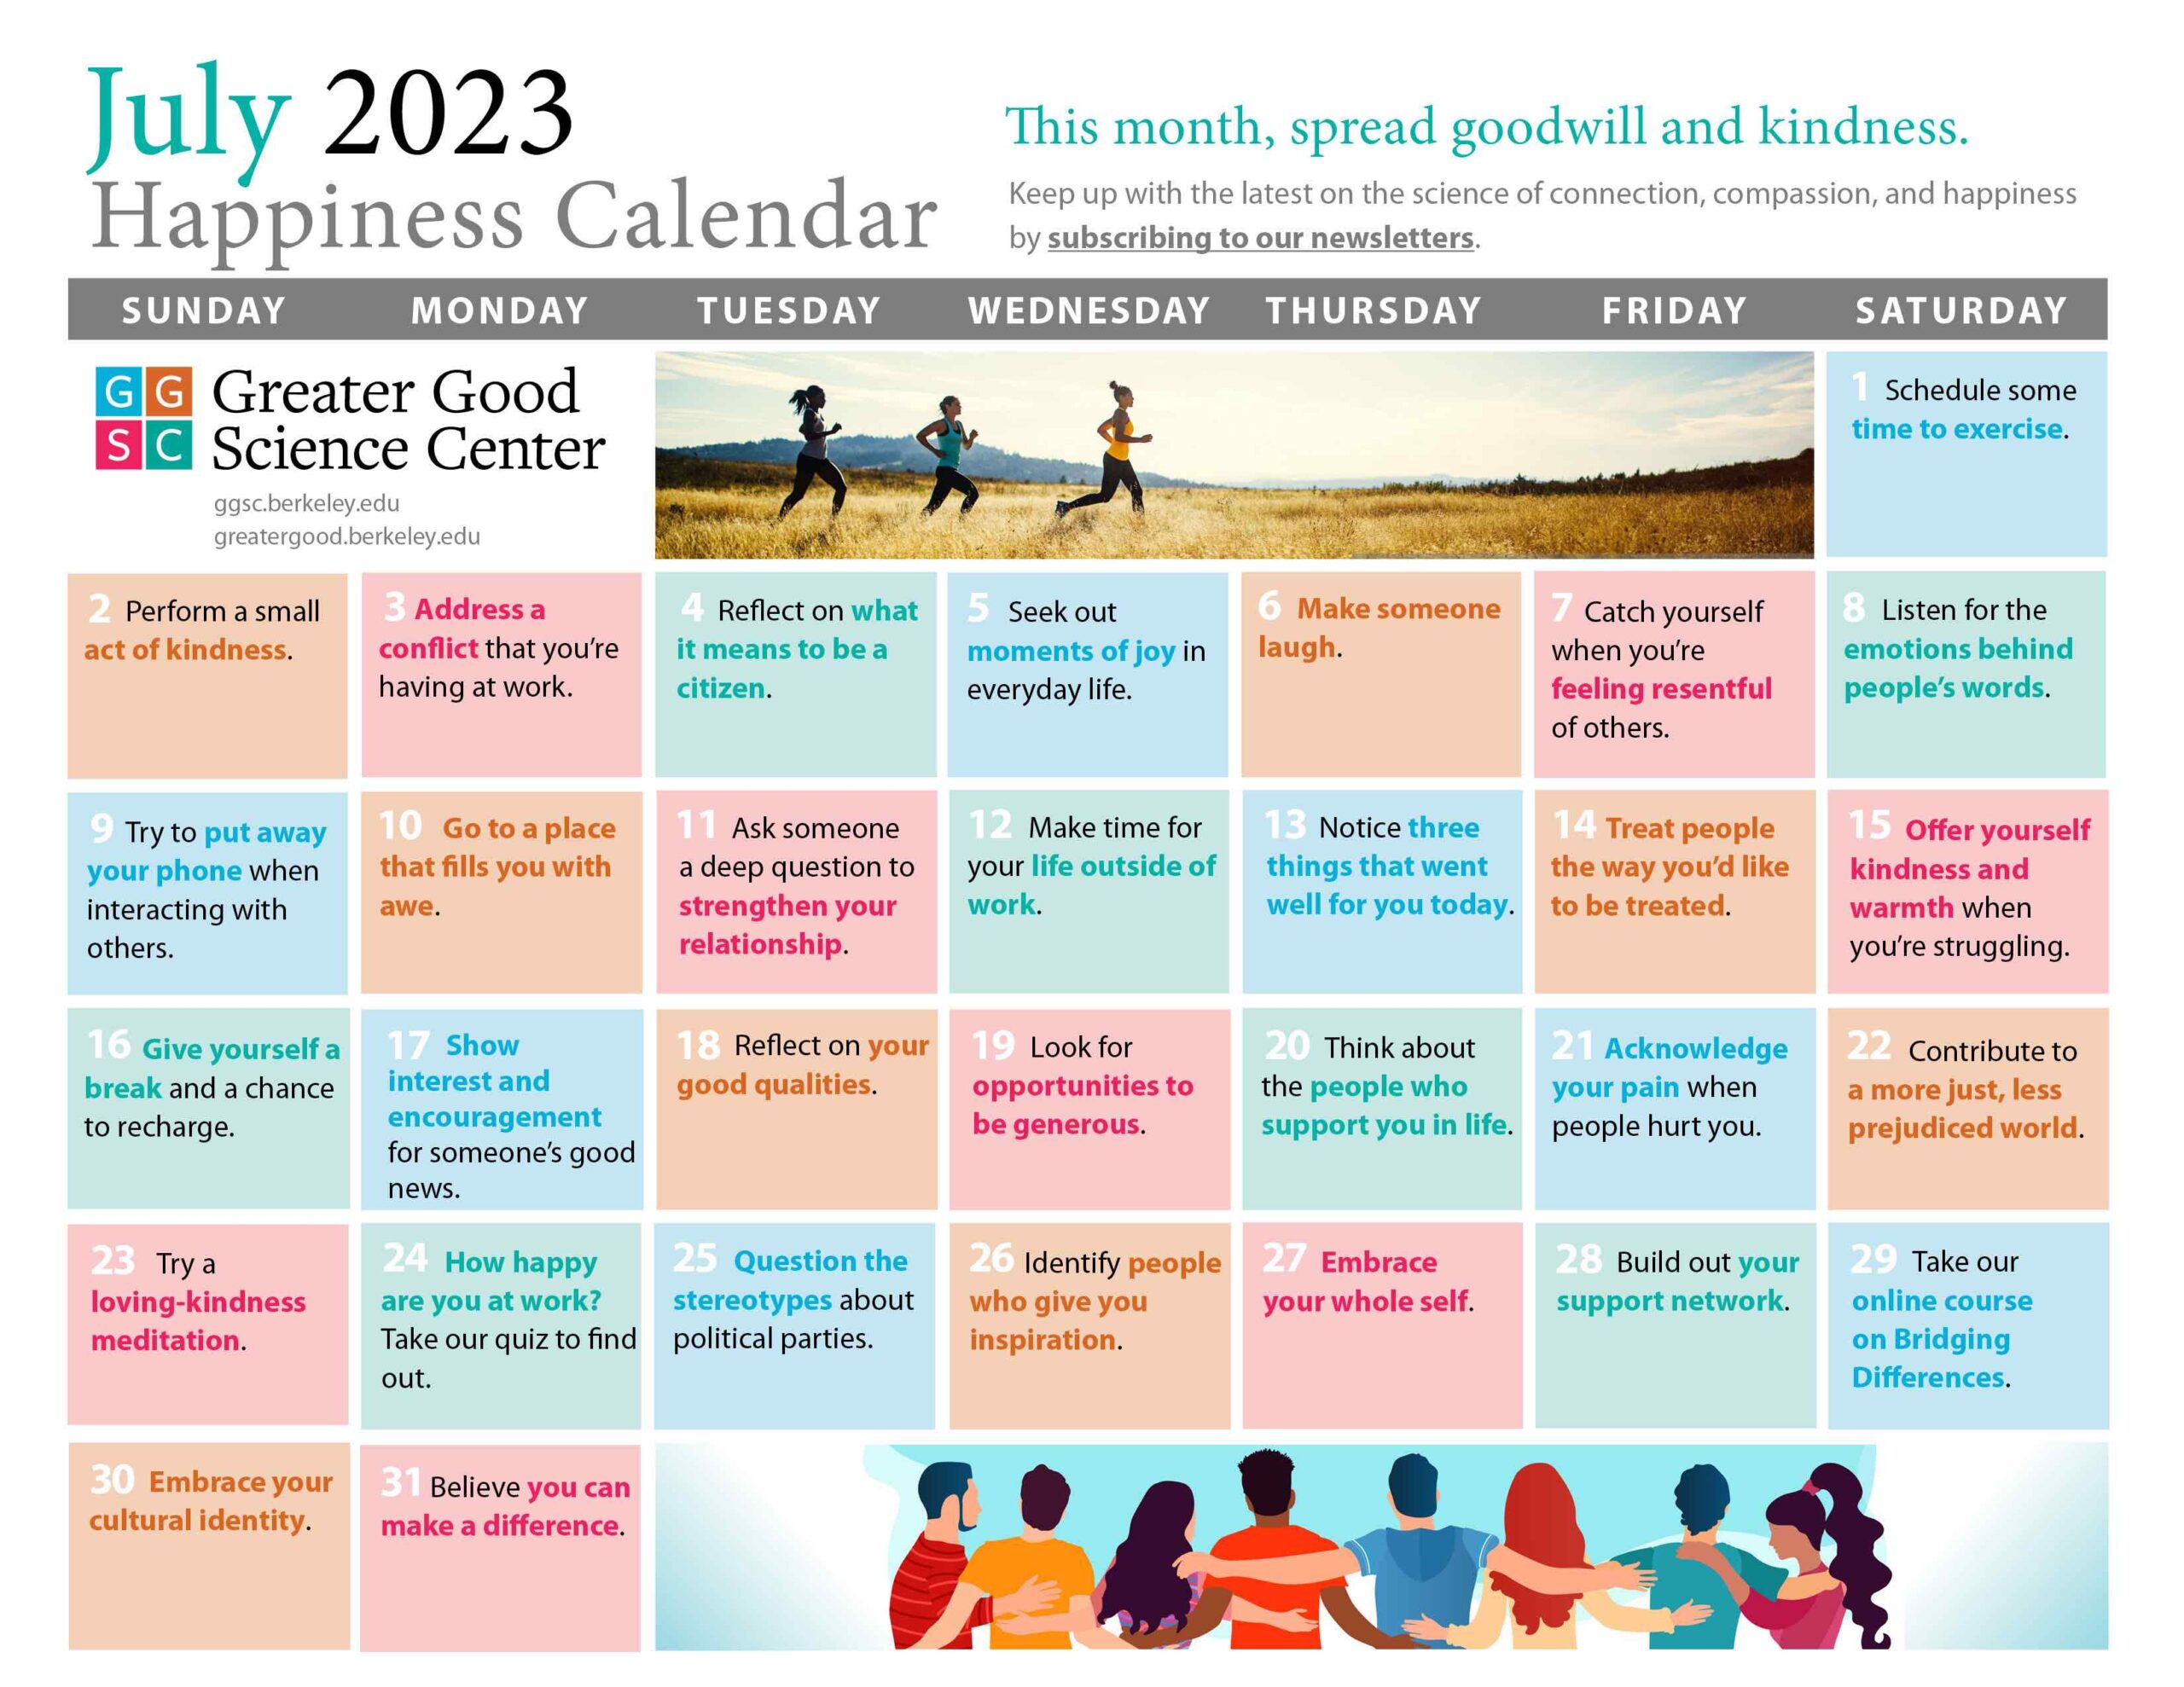 Greater Good Science Center Calendar brought to you from the Midland Area Wellbeing Coalition in Midland, MI.